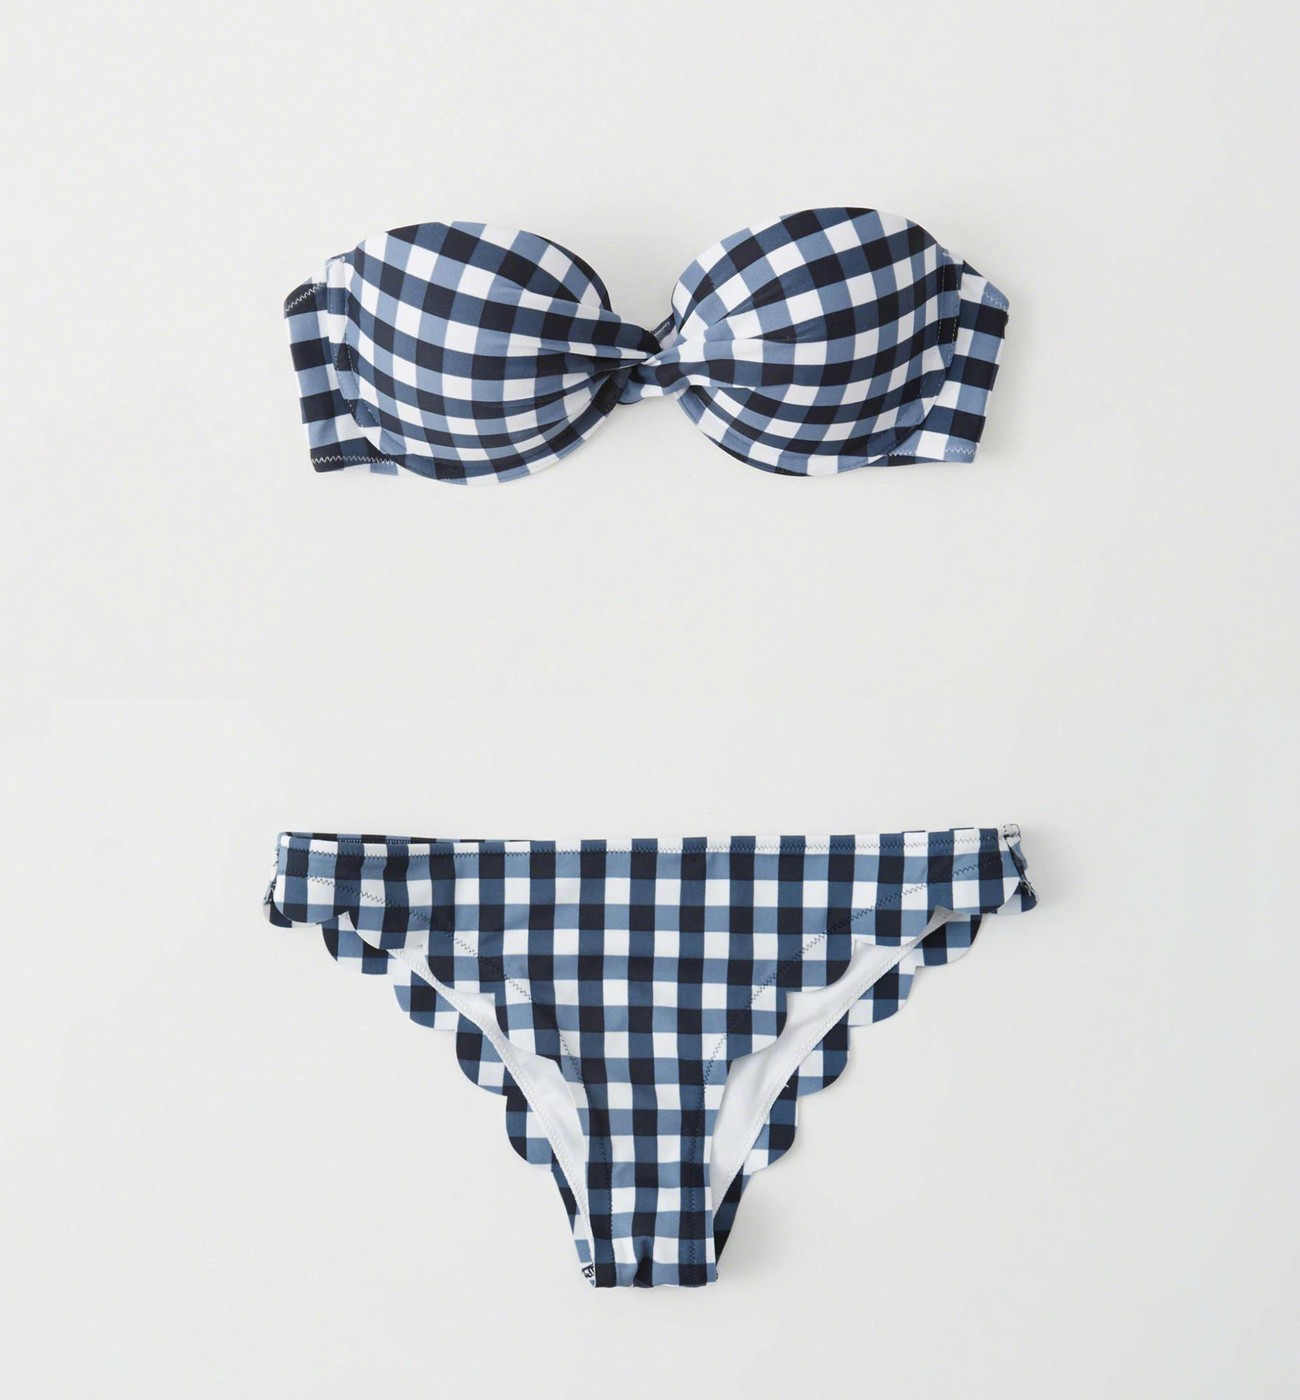 Купальник Abercrombie & Fitch, S (34A), S (34A)